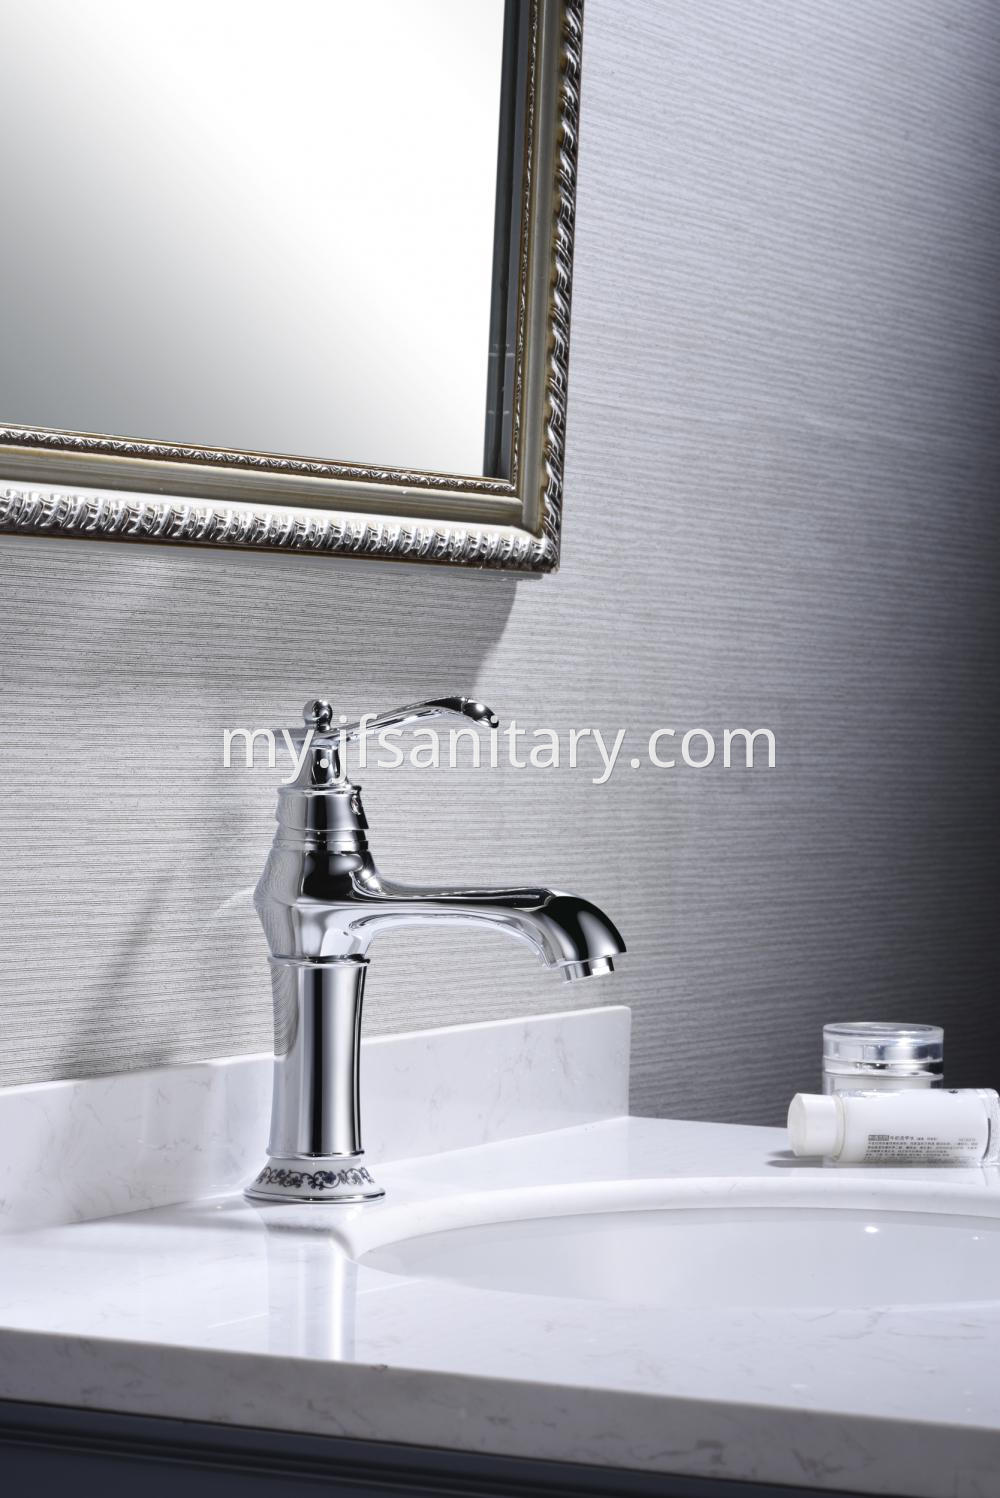 Chrome Single Hole Basin Faucet With Ceramic Ring